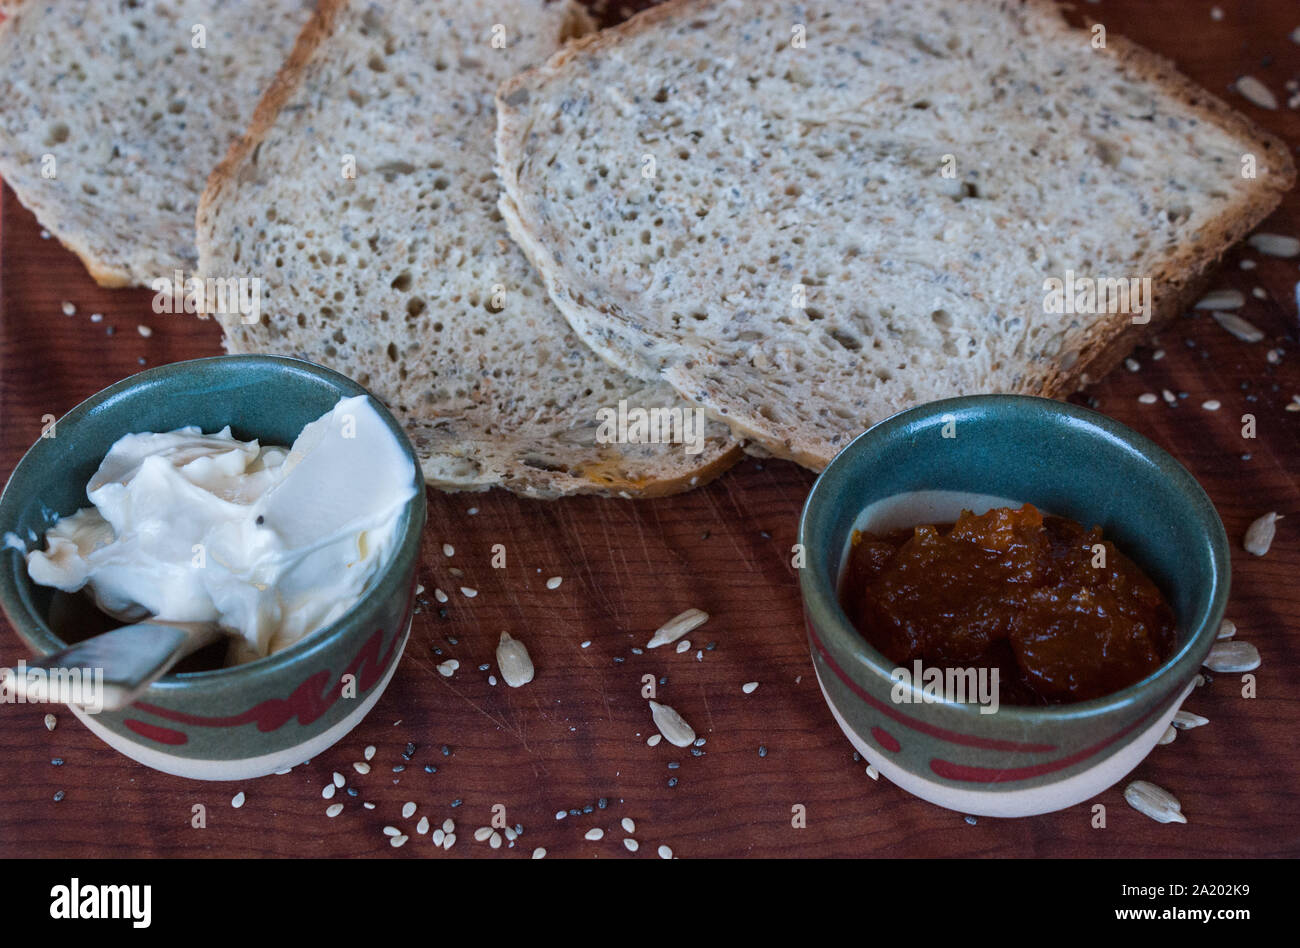 A healthy breakfast with homemade bread, spreadable cheese and pumpkin jam. Stock Photo